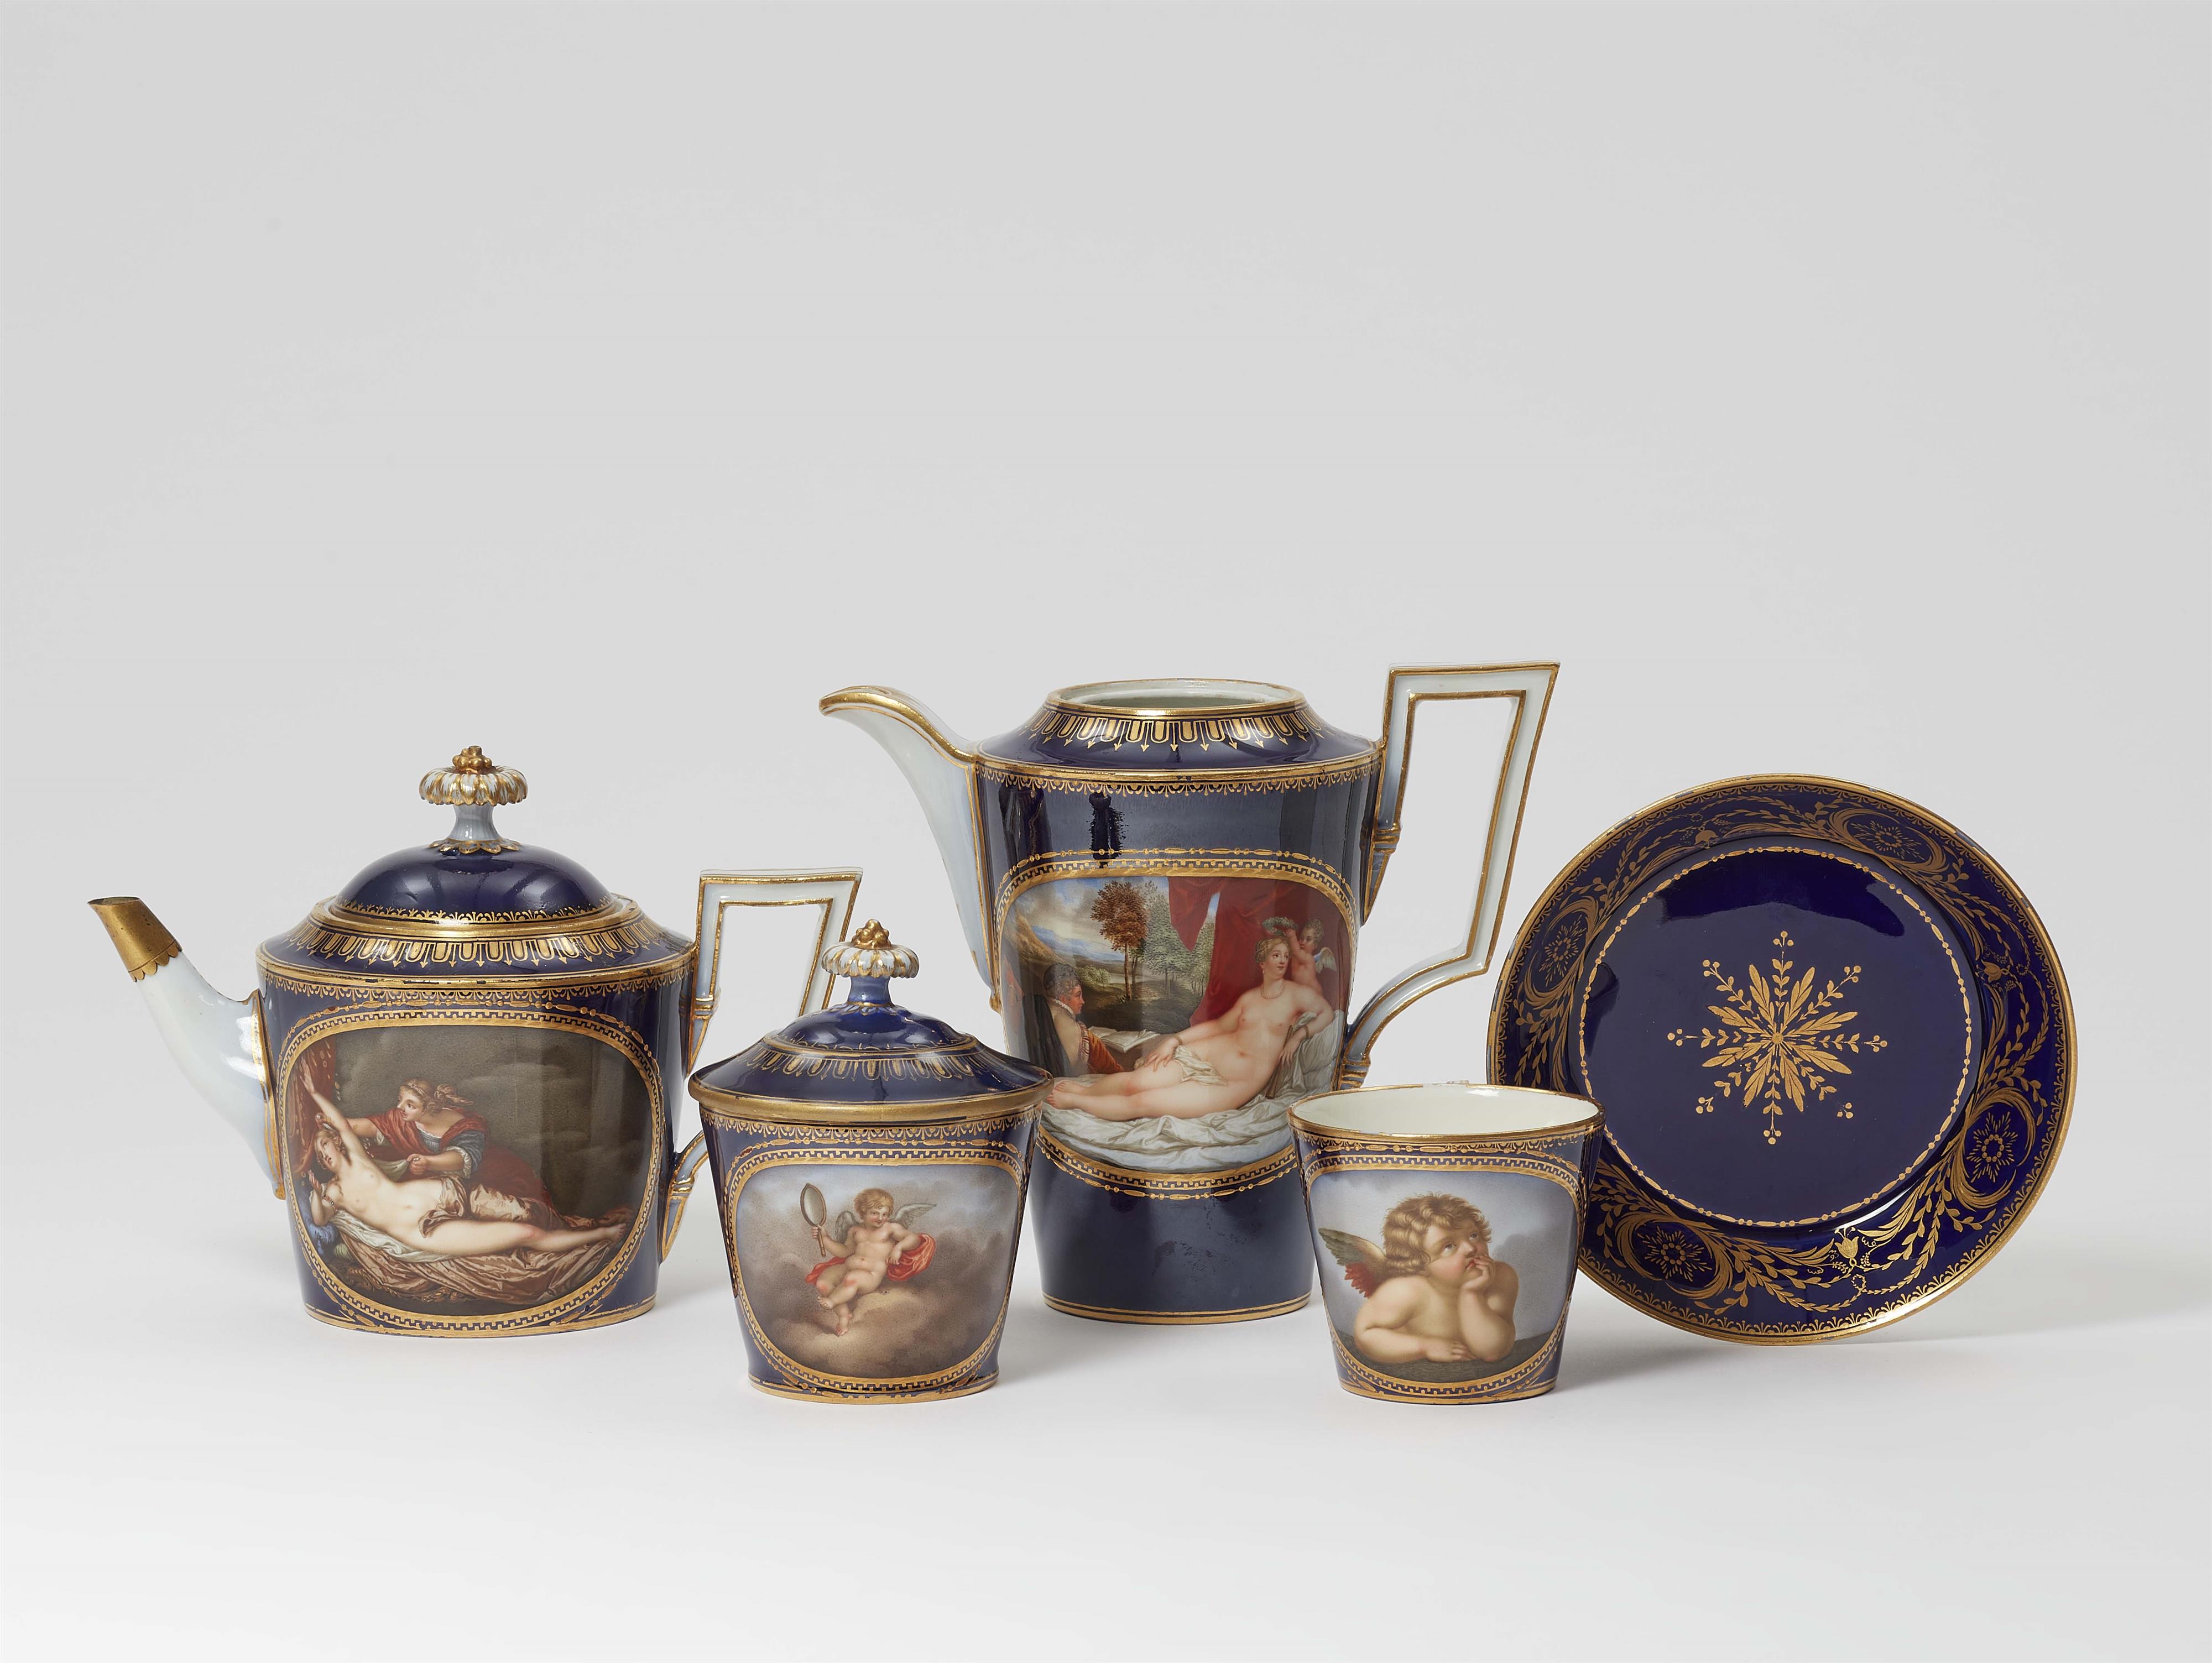 Five items from a Meissen porcelain service with copies of paintings - image-1